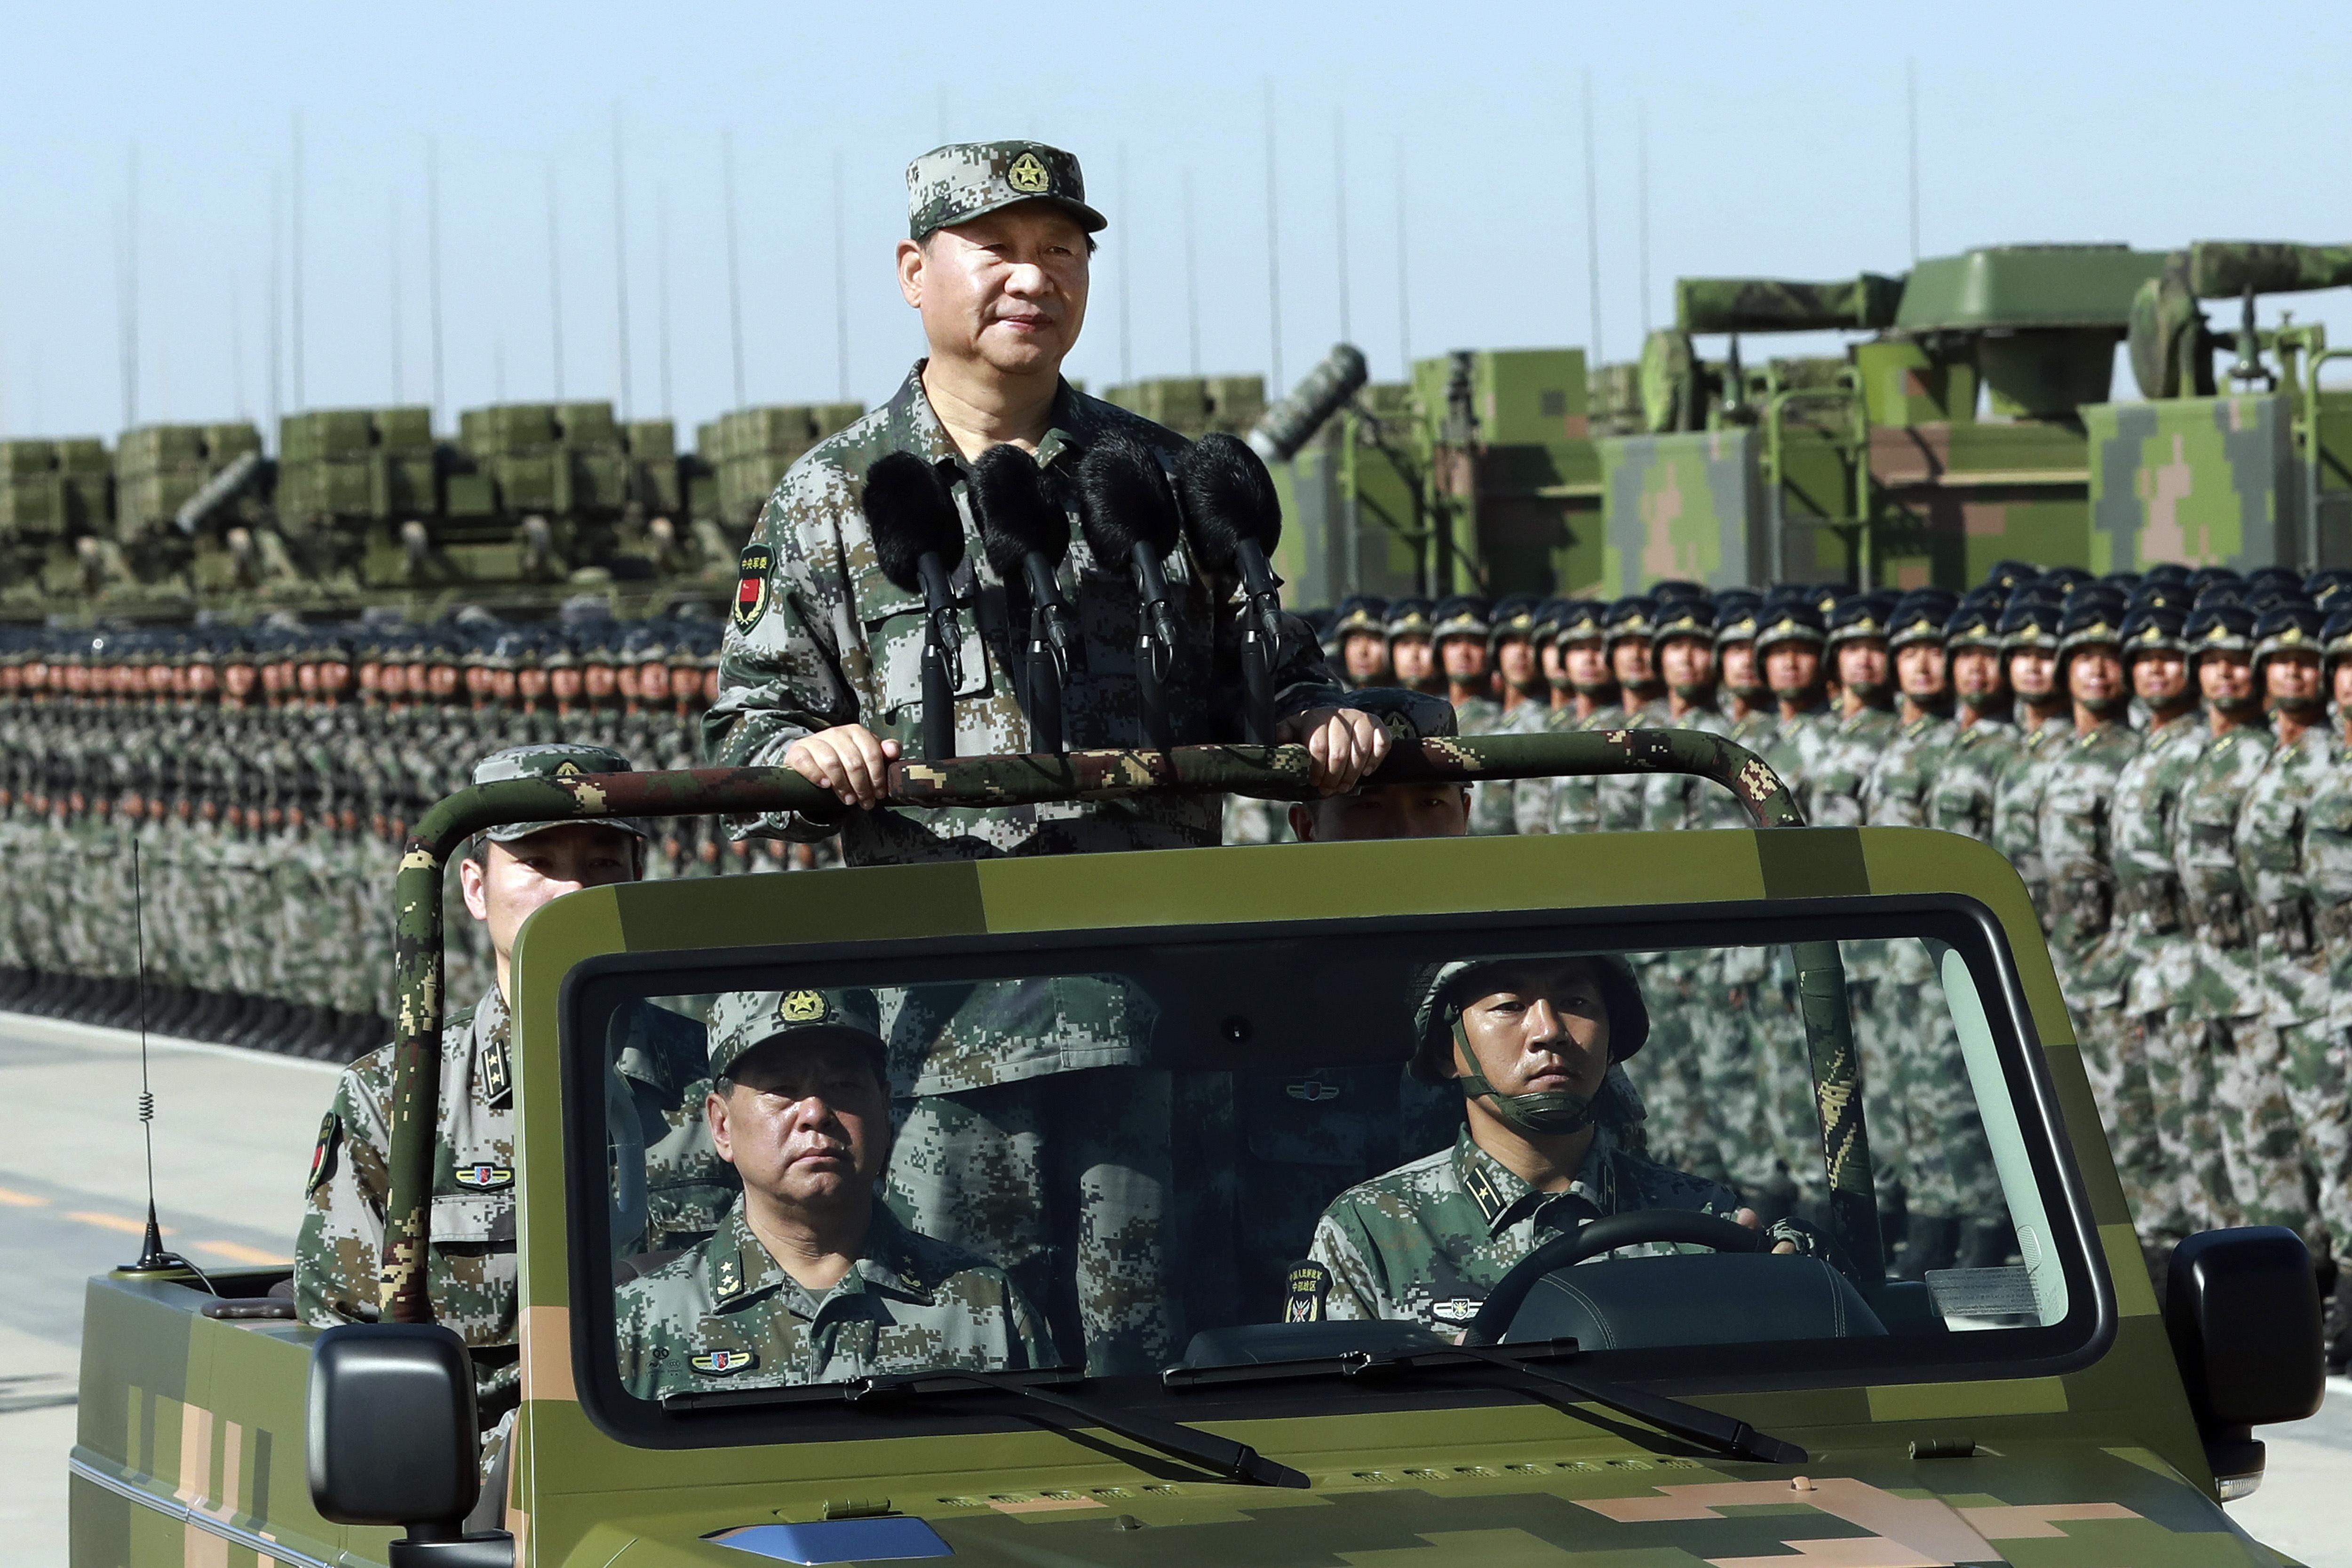 China military expanding, has global ambitions: Congressional report